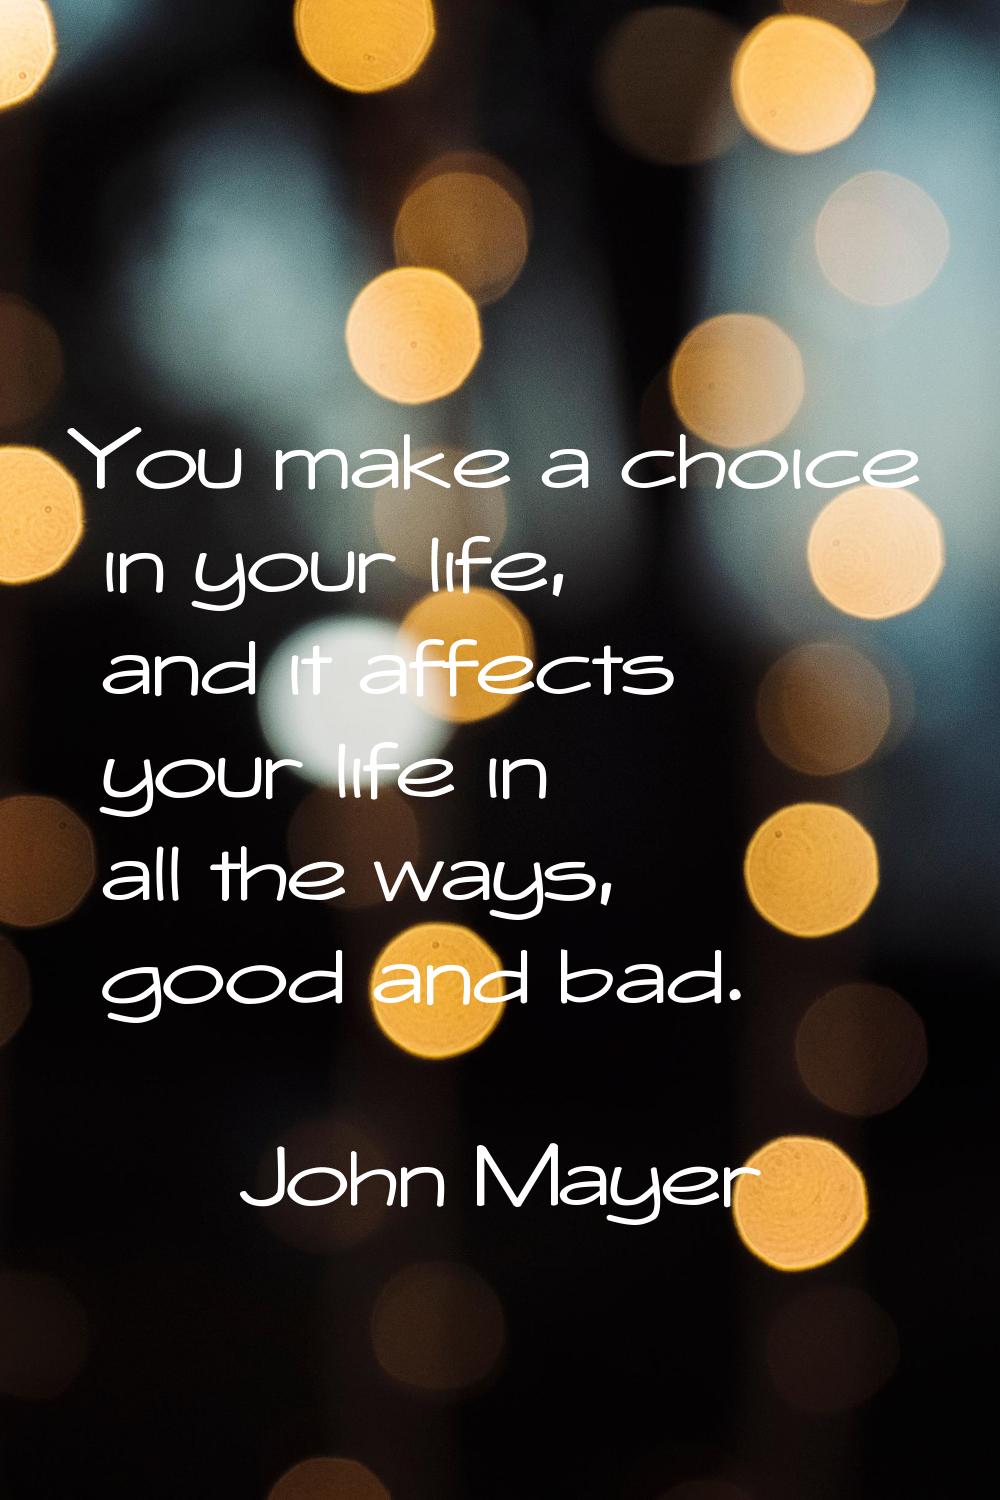 You make a choice in your life, and it affects your life in all the ways, good and bad.